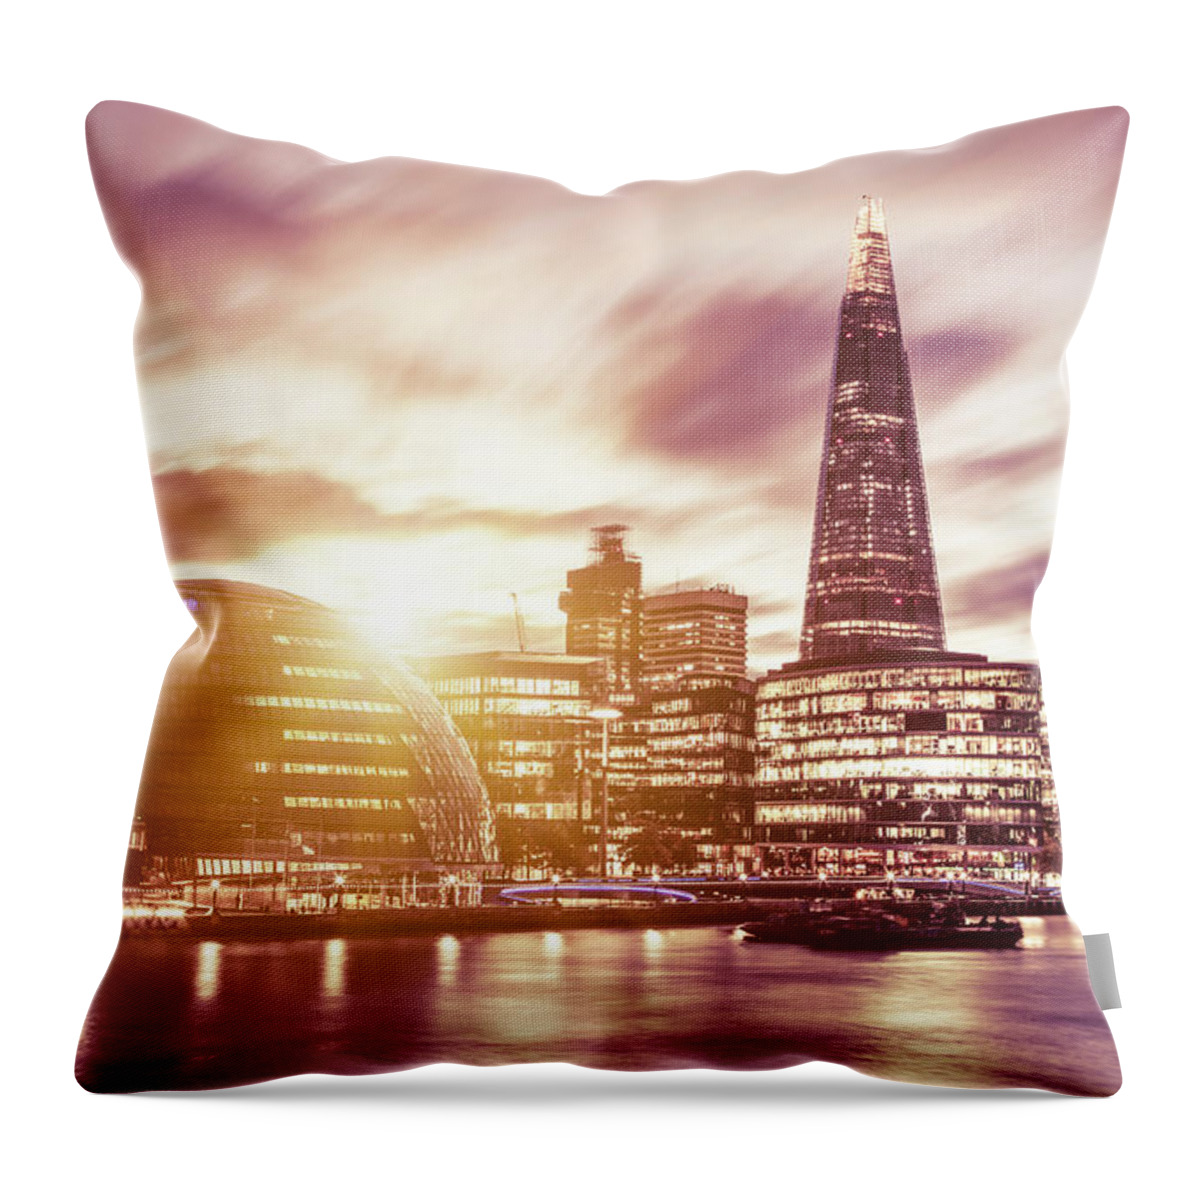 Corporate Business Throw Pillow featuring the photograph London Cityscape At Dusk by Leopatrizi